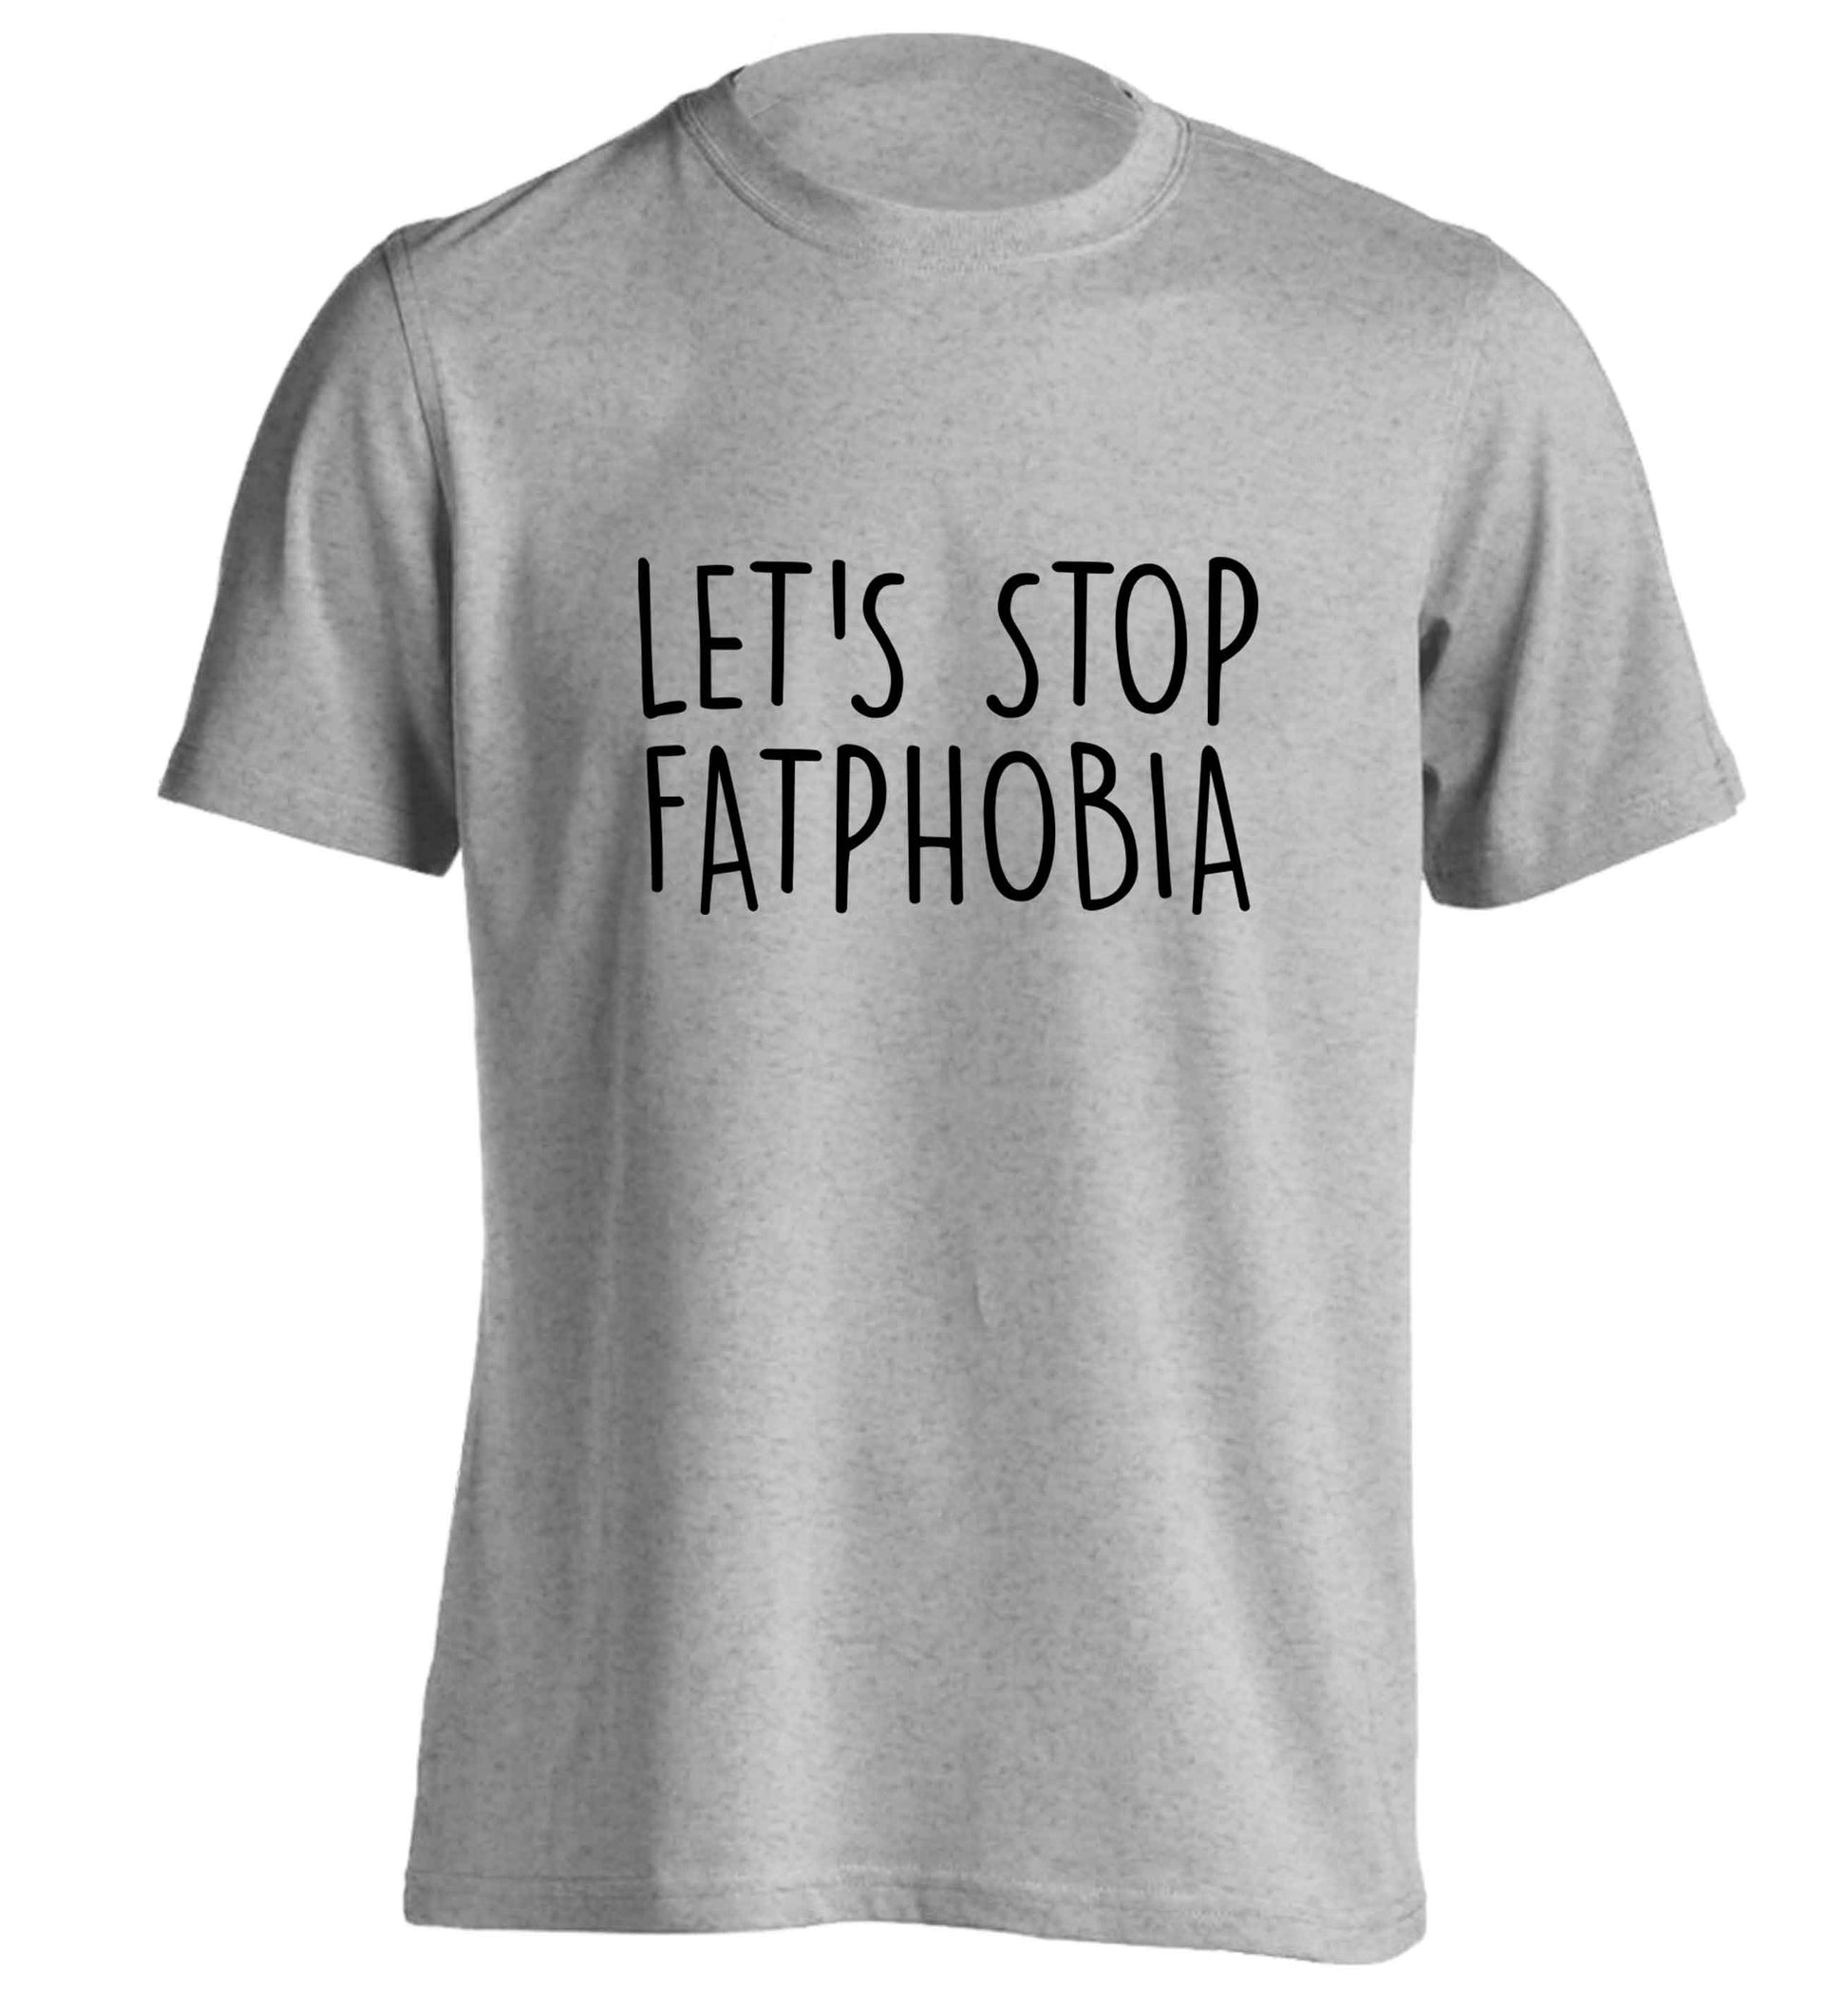 Let's stop fatphobia adults unisex grey Tshirt 2XL